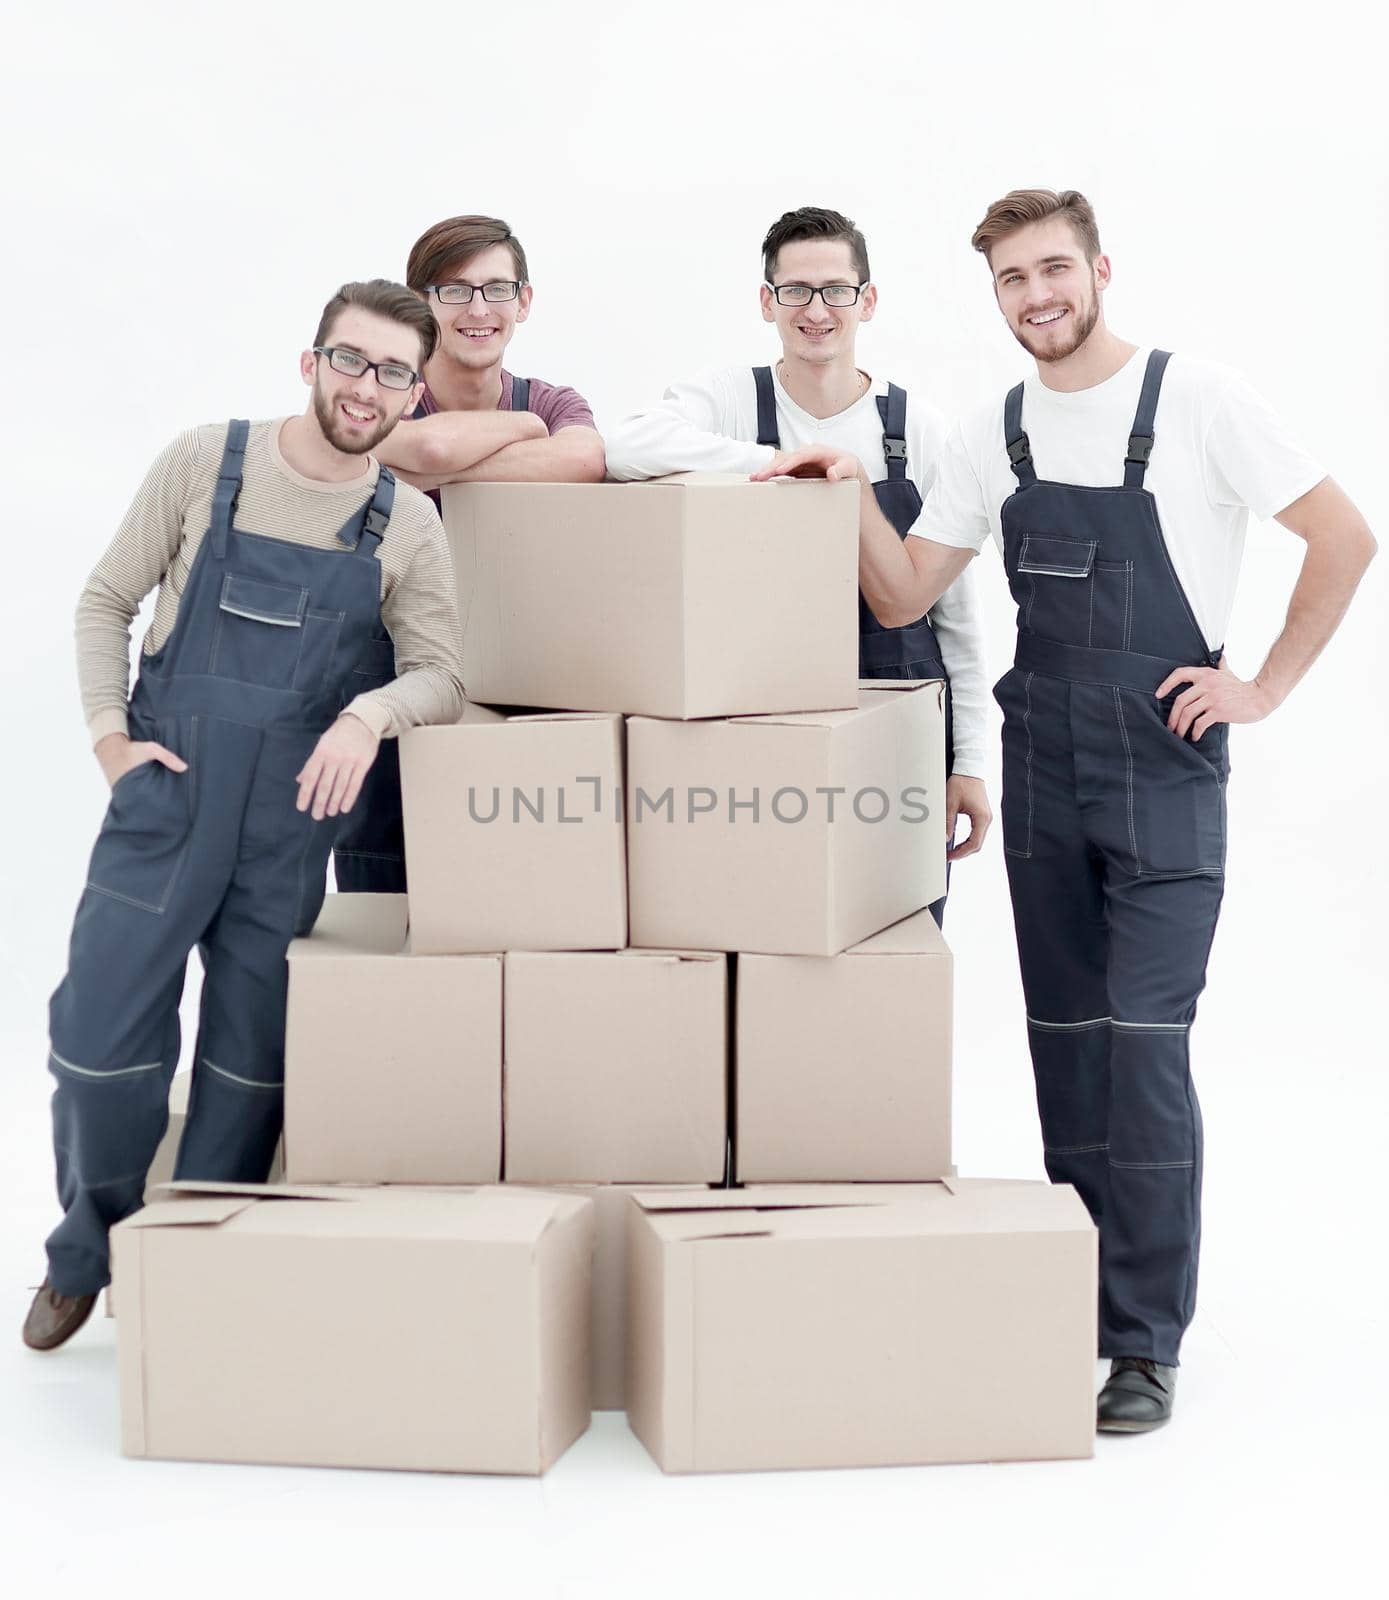 Workers deliver boxes, isolated, white background by asdf